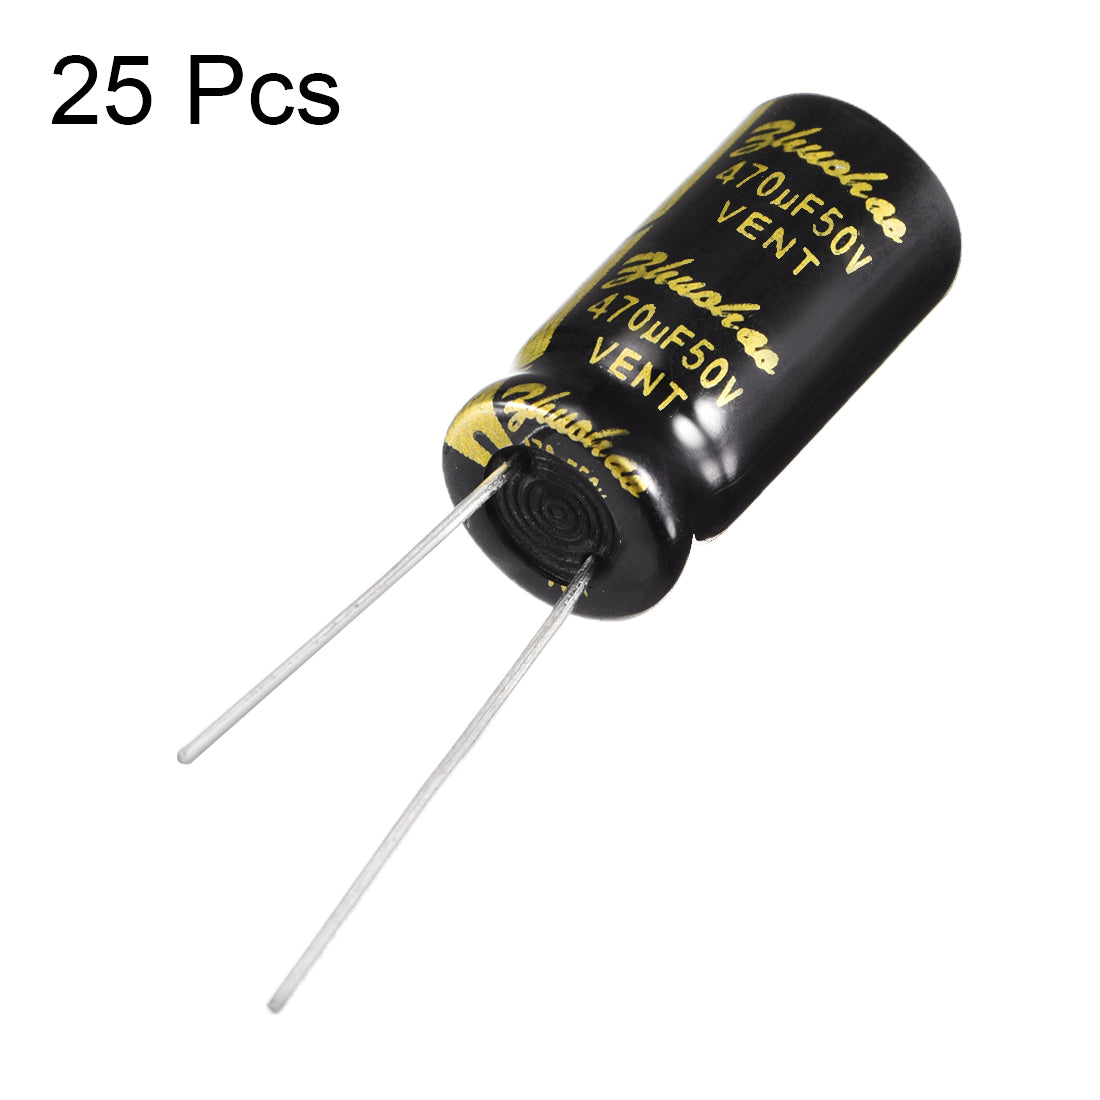 uxcell Uxcell Aluminum Radial Electrolytic Capacitor with 470uF 50V 105 Celsius Life 2000H 10 x 20 mm Black 25pcs